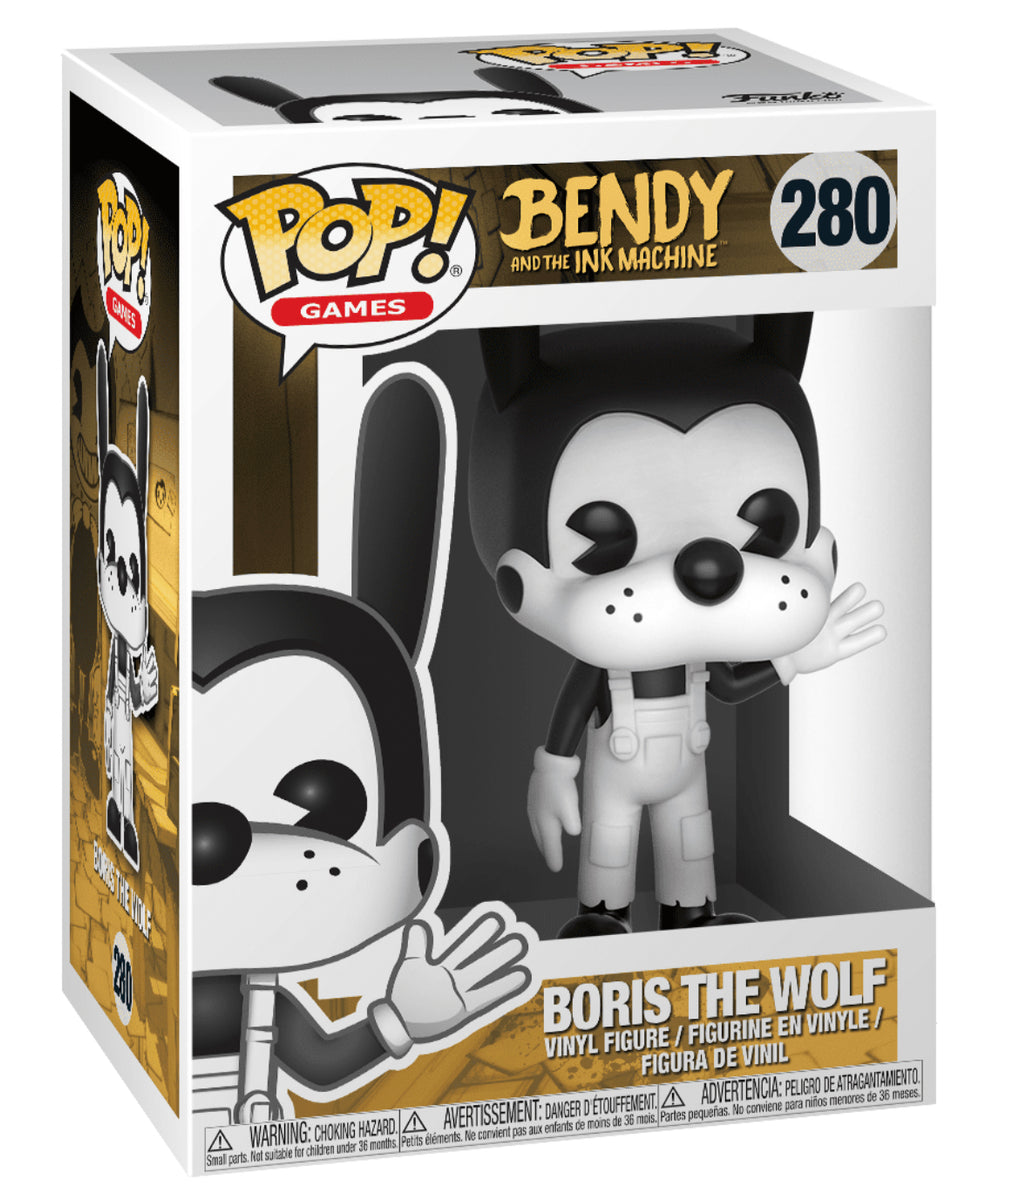 Game INK Bendy Sammy Boris the Wolf Characters Vinyl Figure Model Toys for  Children